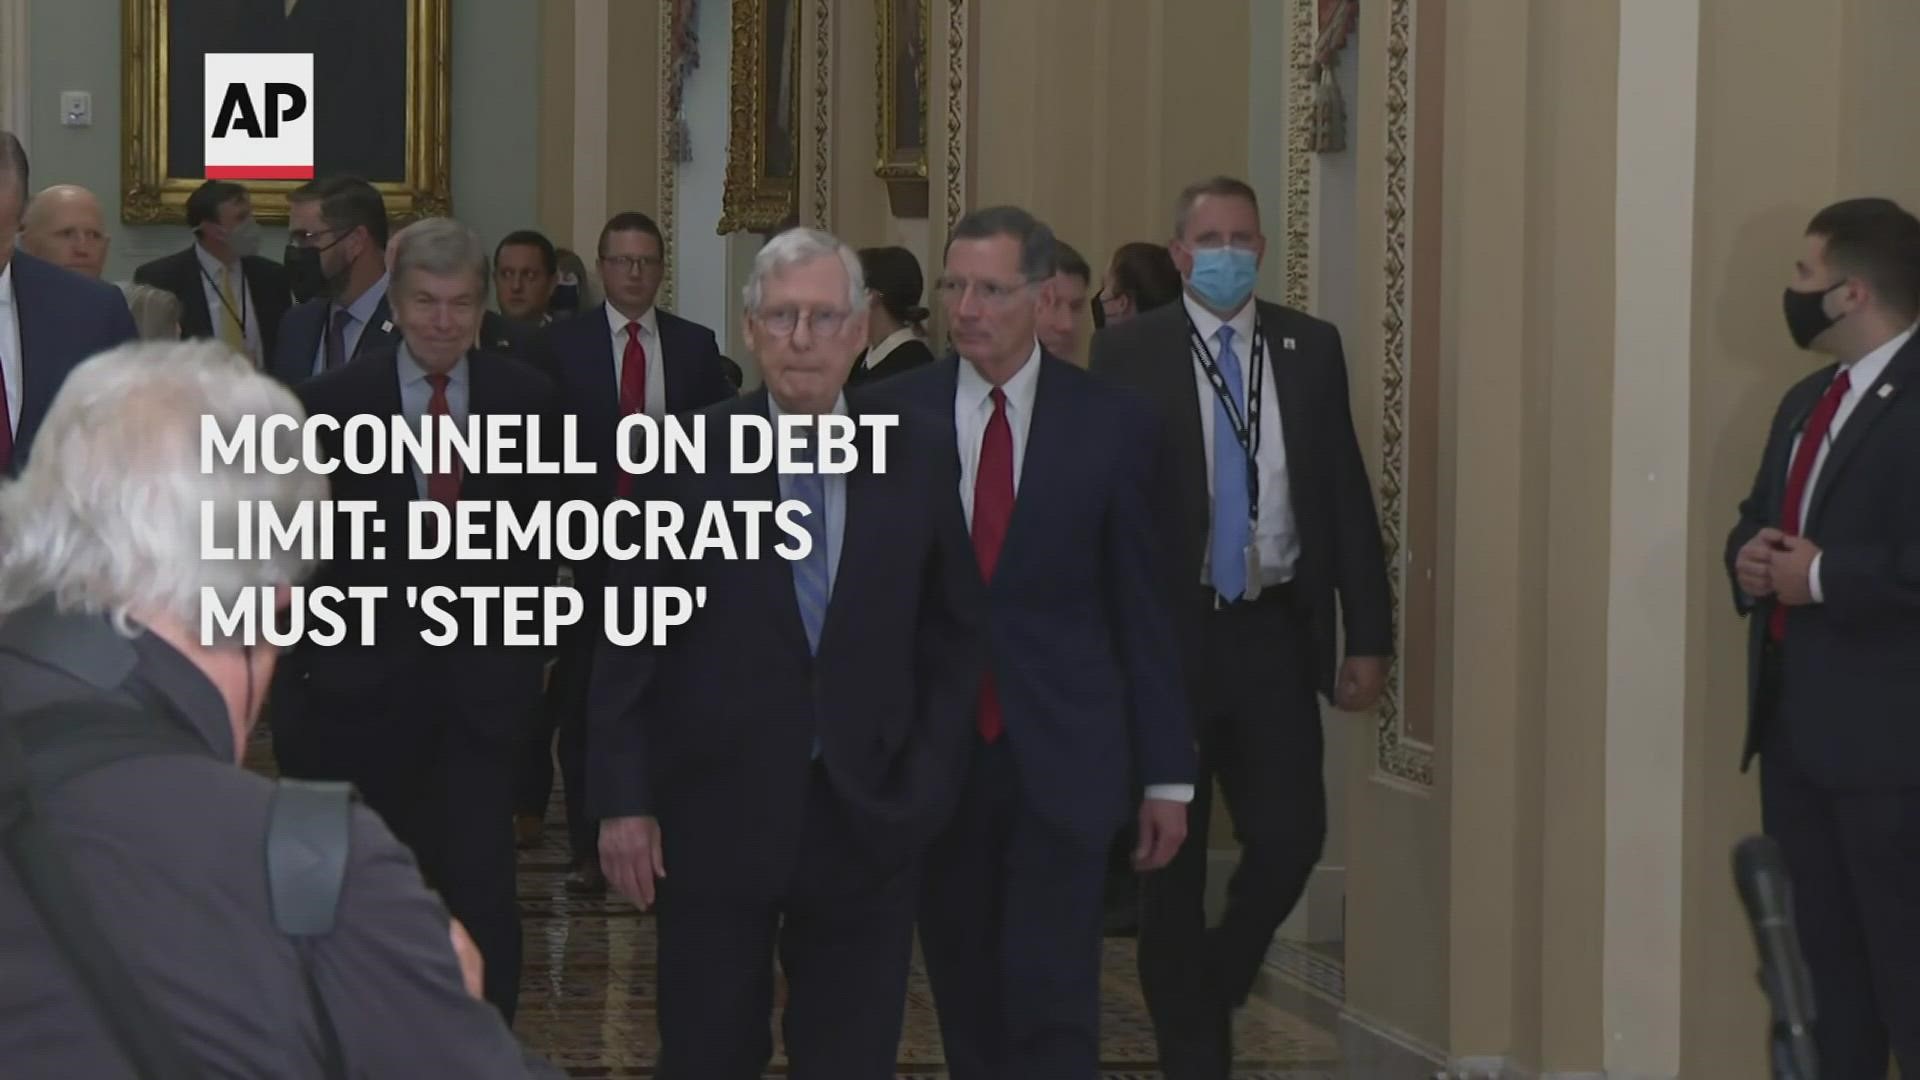 Senate Republican leader Mitch McConnell refuses to lend his party's help on the debt ceiling issue and says Democrats must "step up and take care of it."